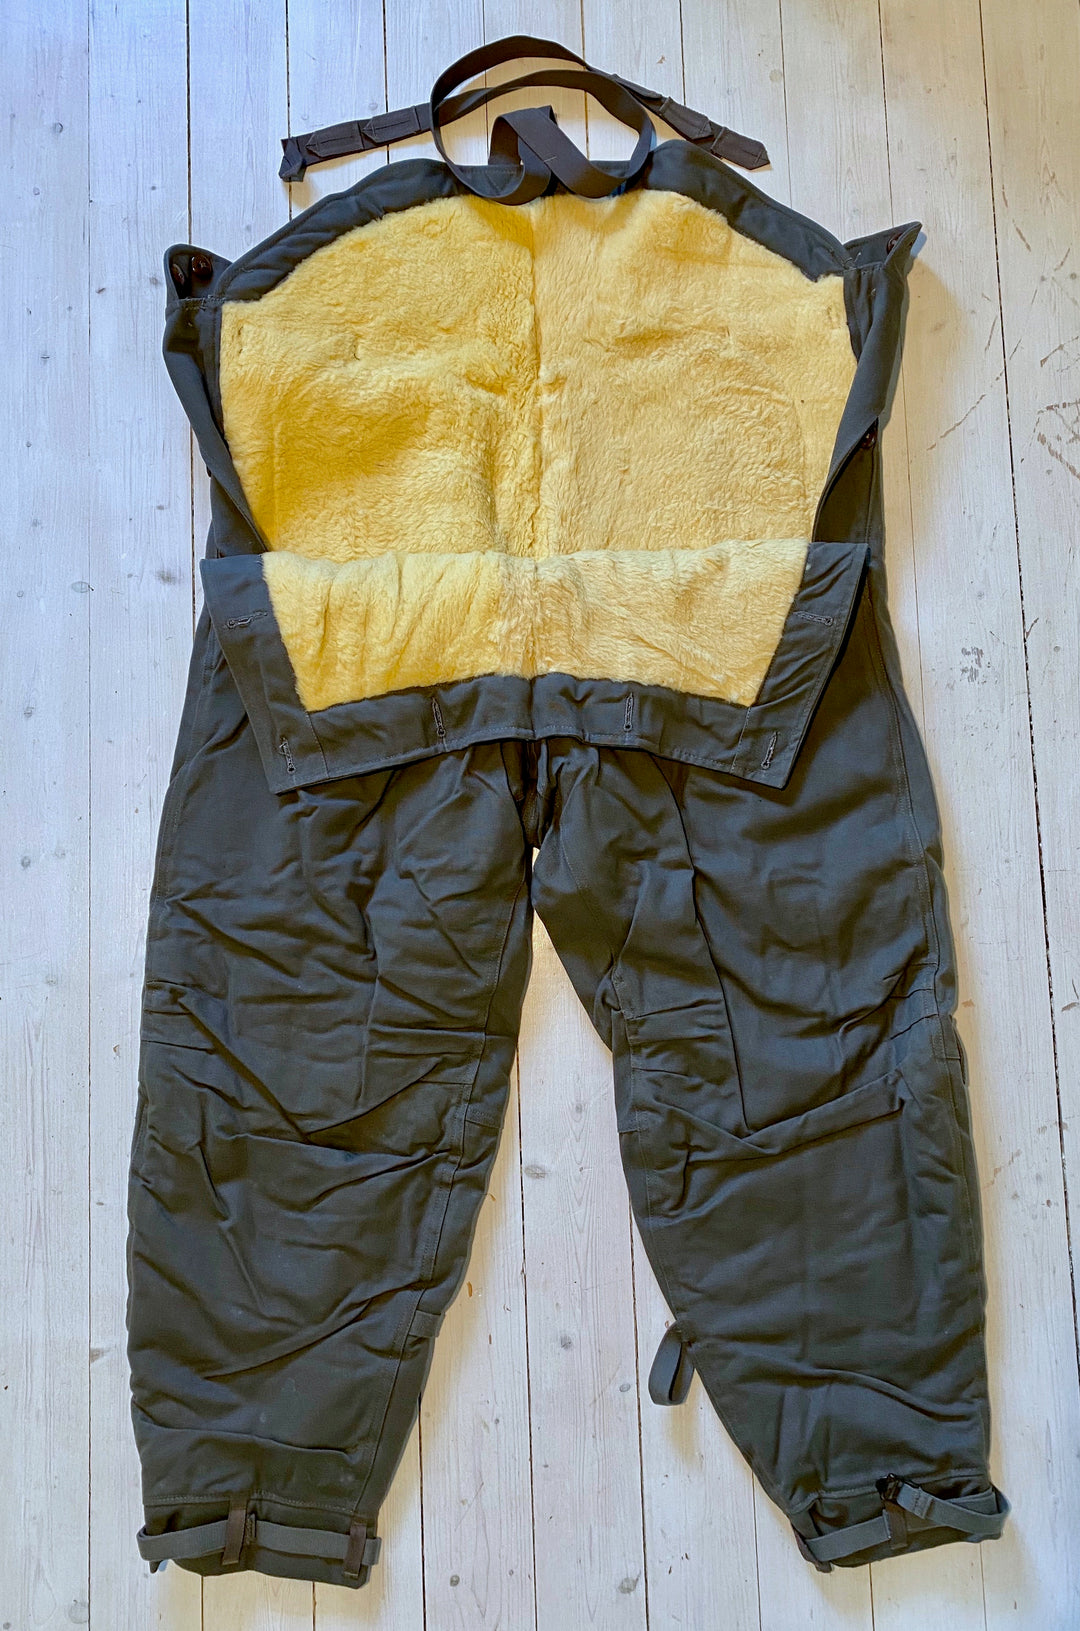 Any help identifying this pilot or motorcycle jacket? 20200217-58_1080x